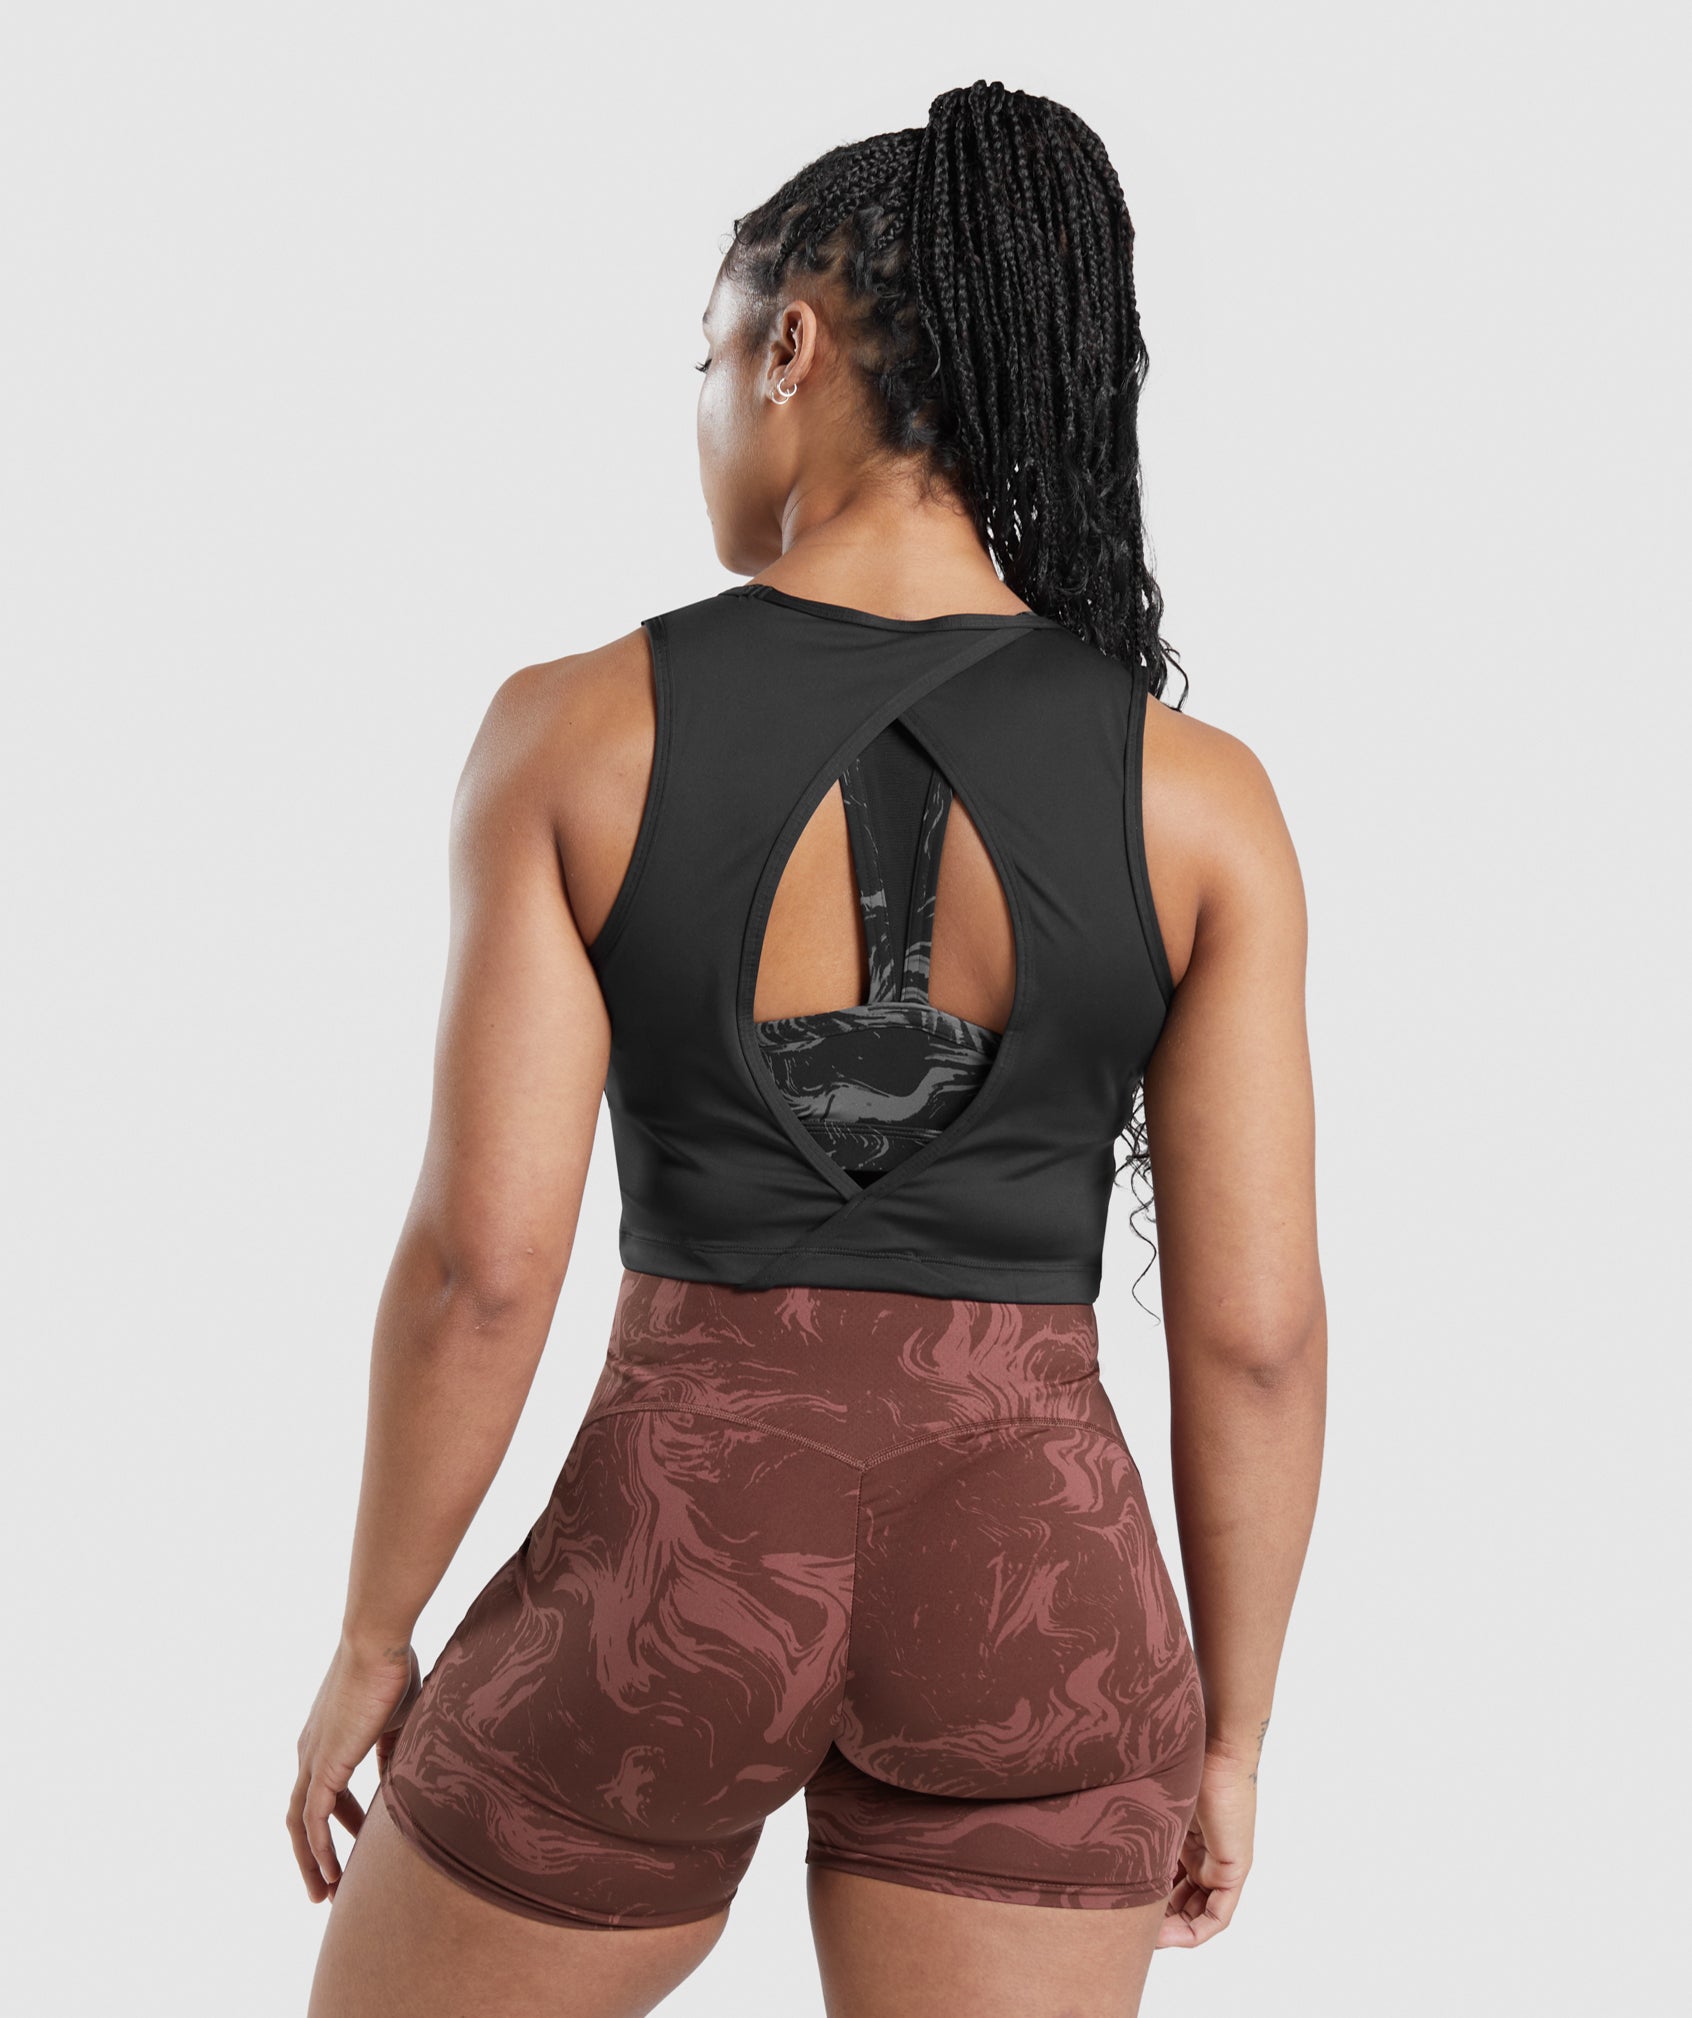 Gymshark on X: Essential gym wear. The Crop Mesh Back tank is the